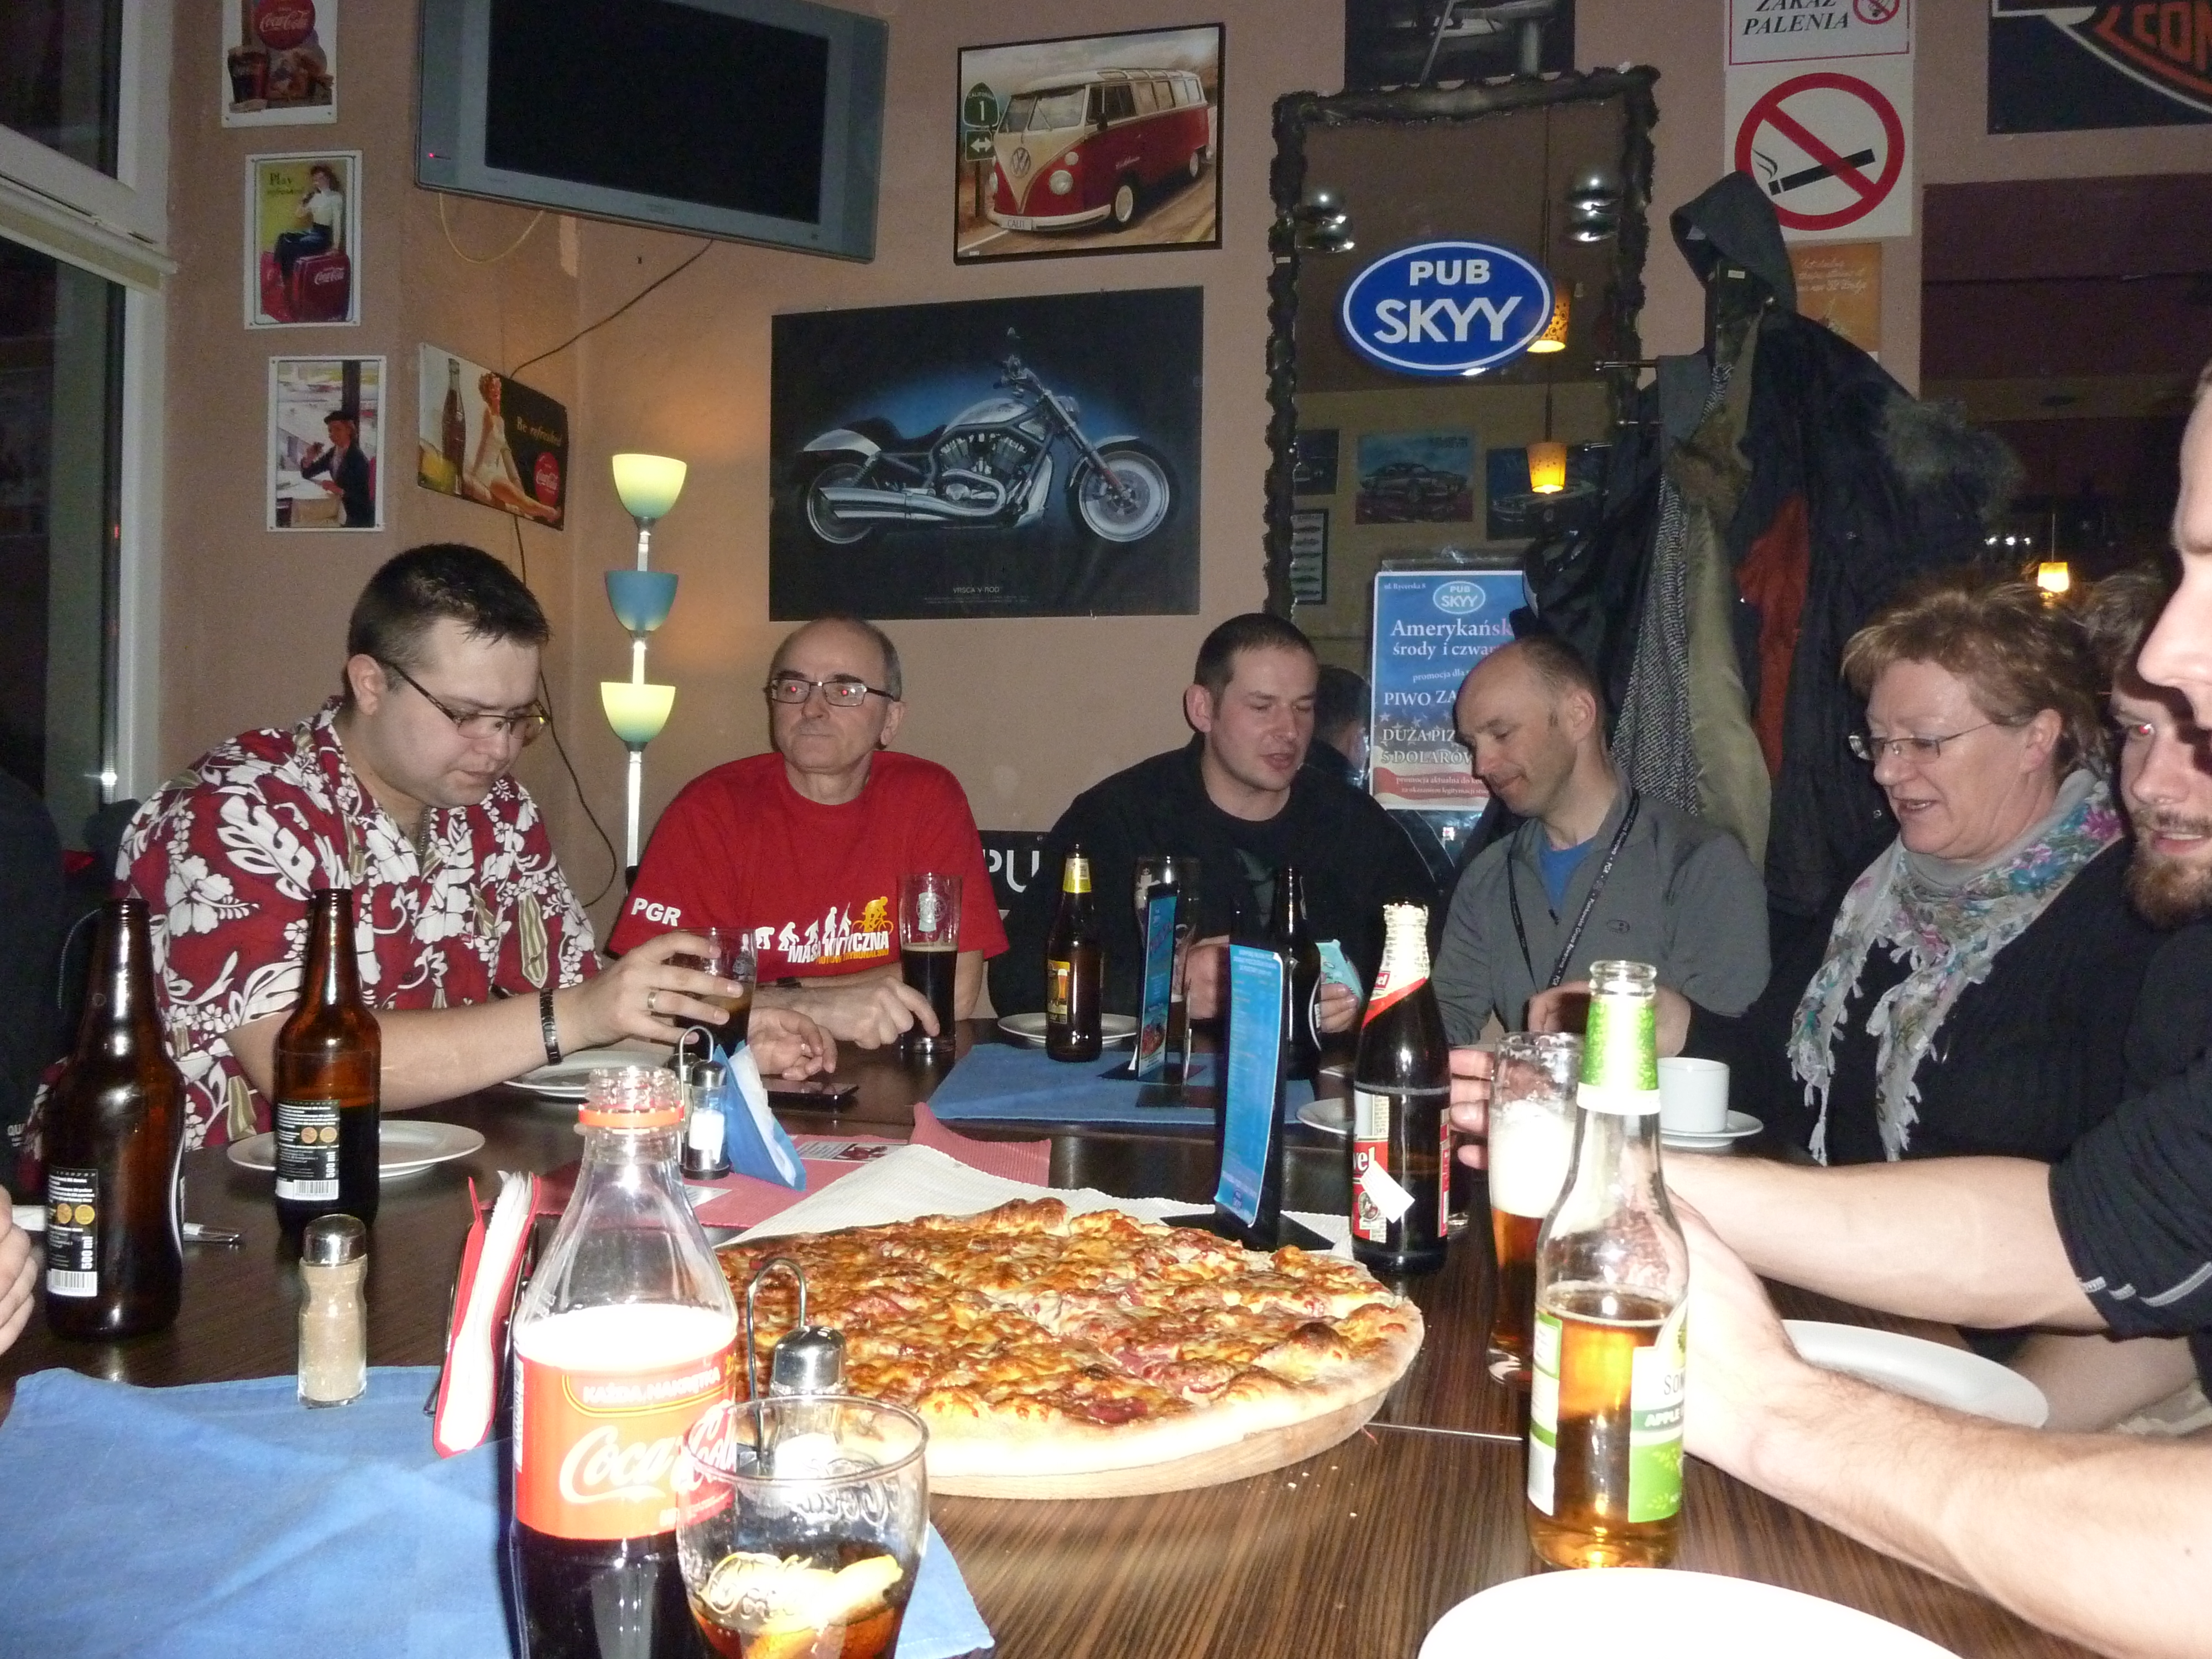 Having beer, pizza and interesting discussions.